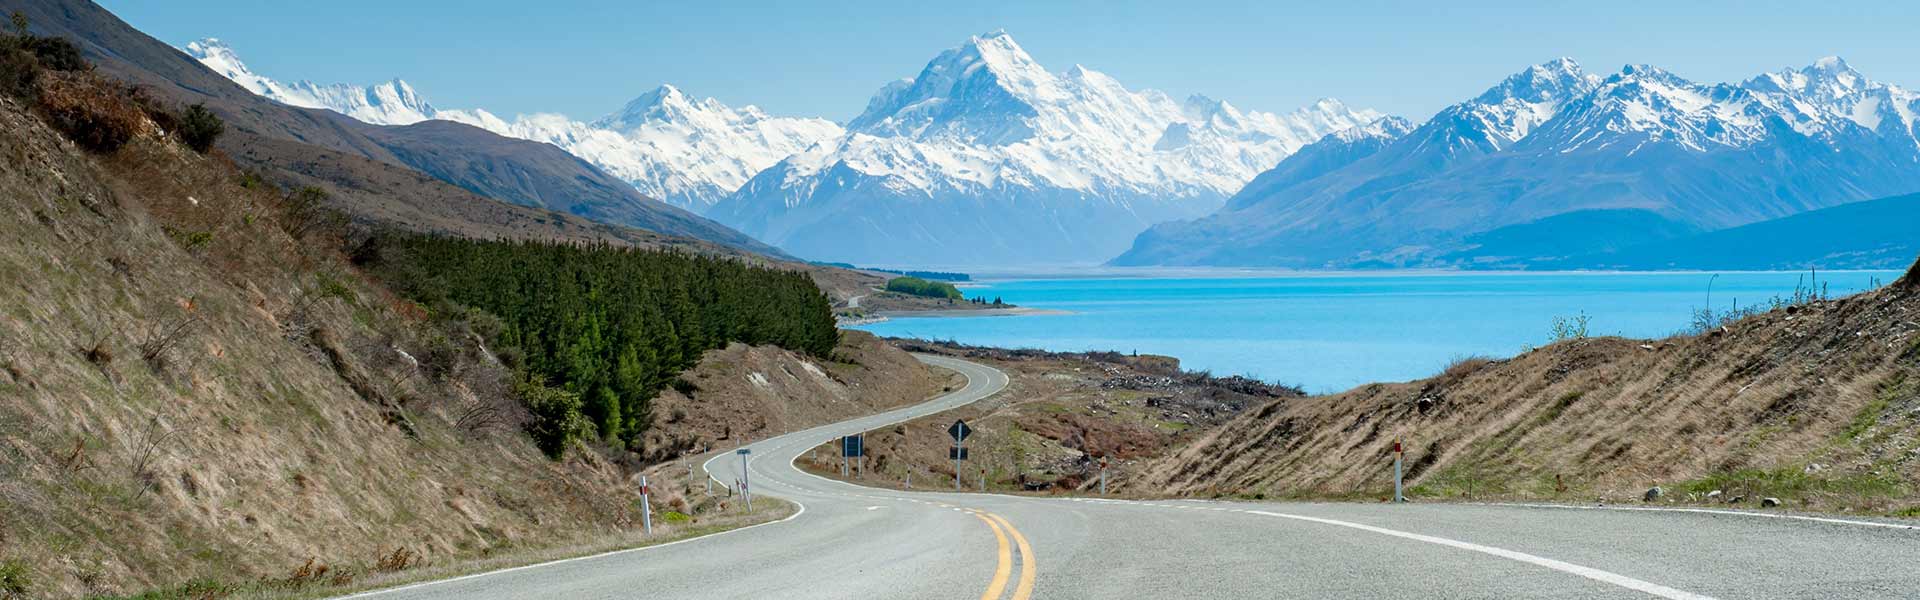 New Zealand road close to lake and mountains Image Credit: Paul Lemlin